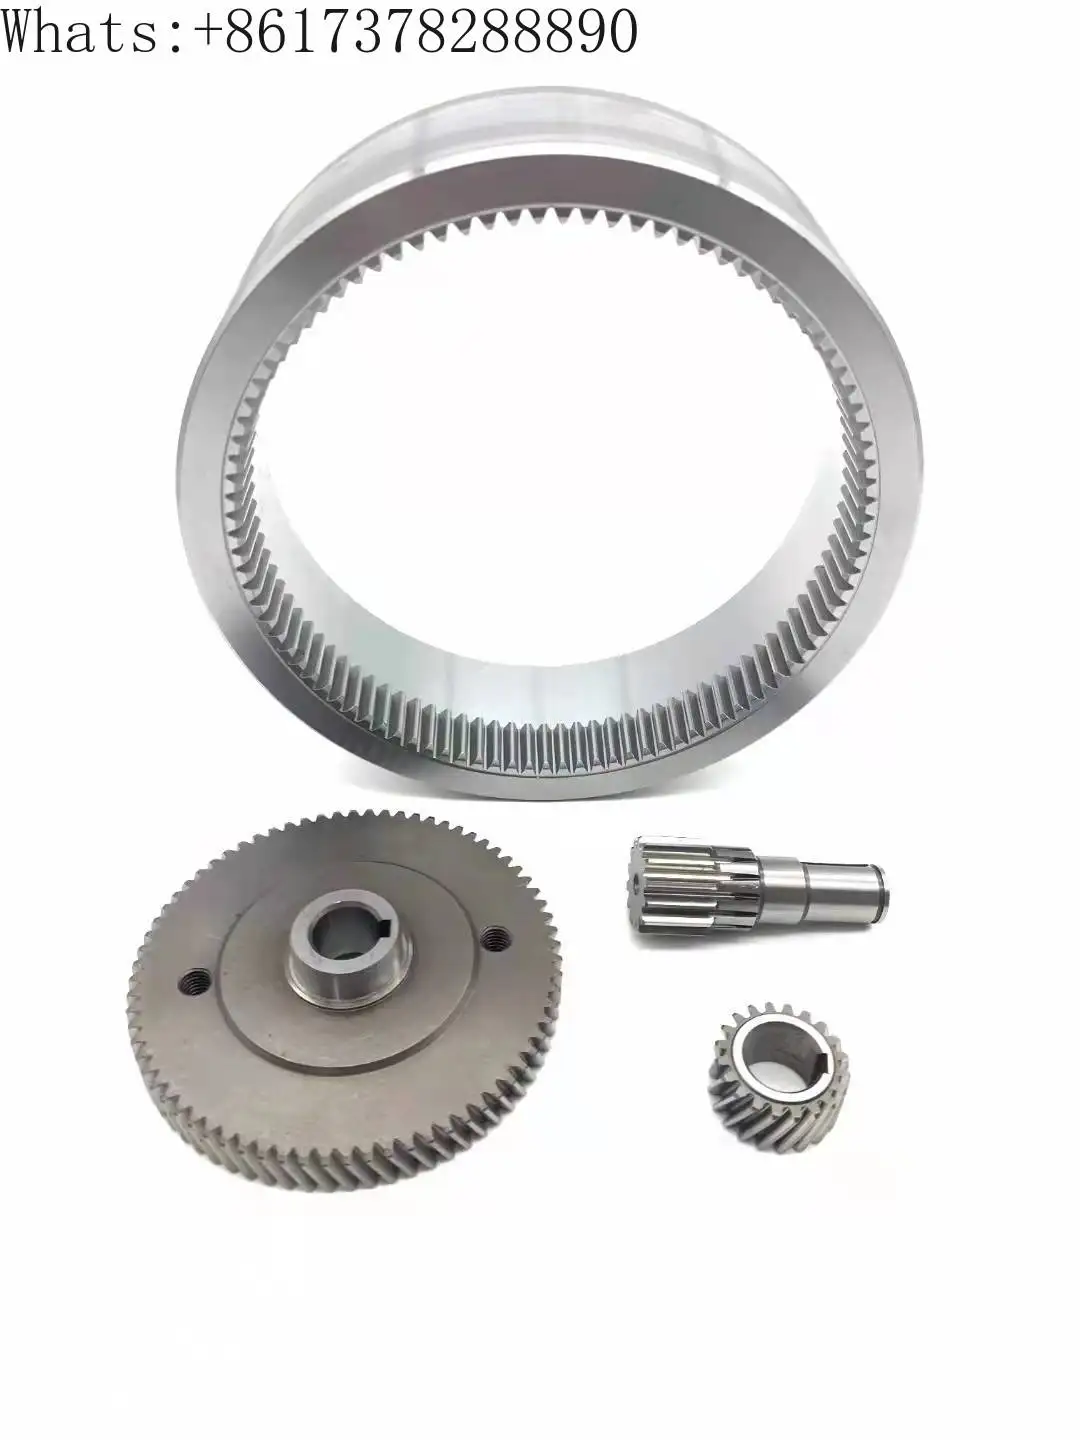 

Electric forklift parts Lida Heli Little King Kong CBD15-170H new gear ring gear set of four.